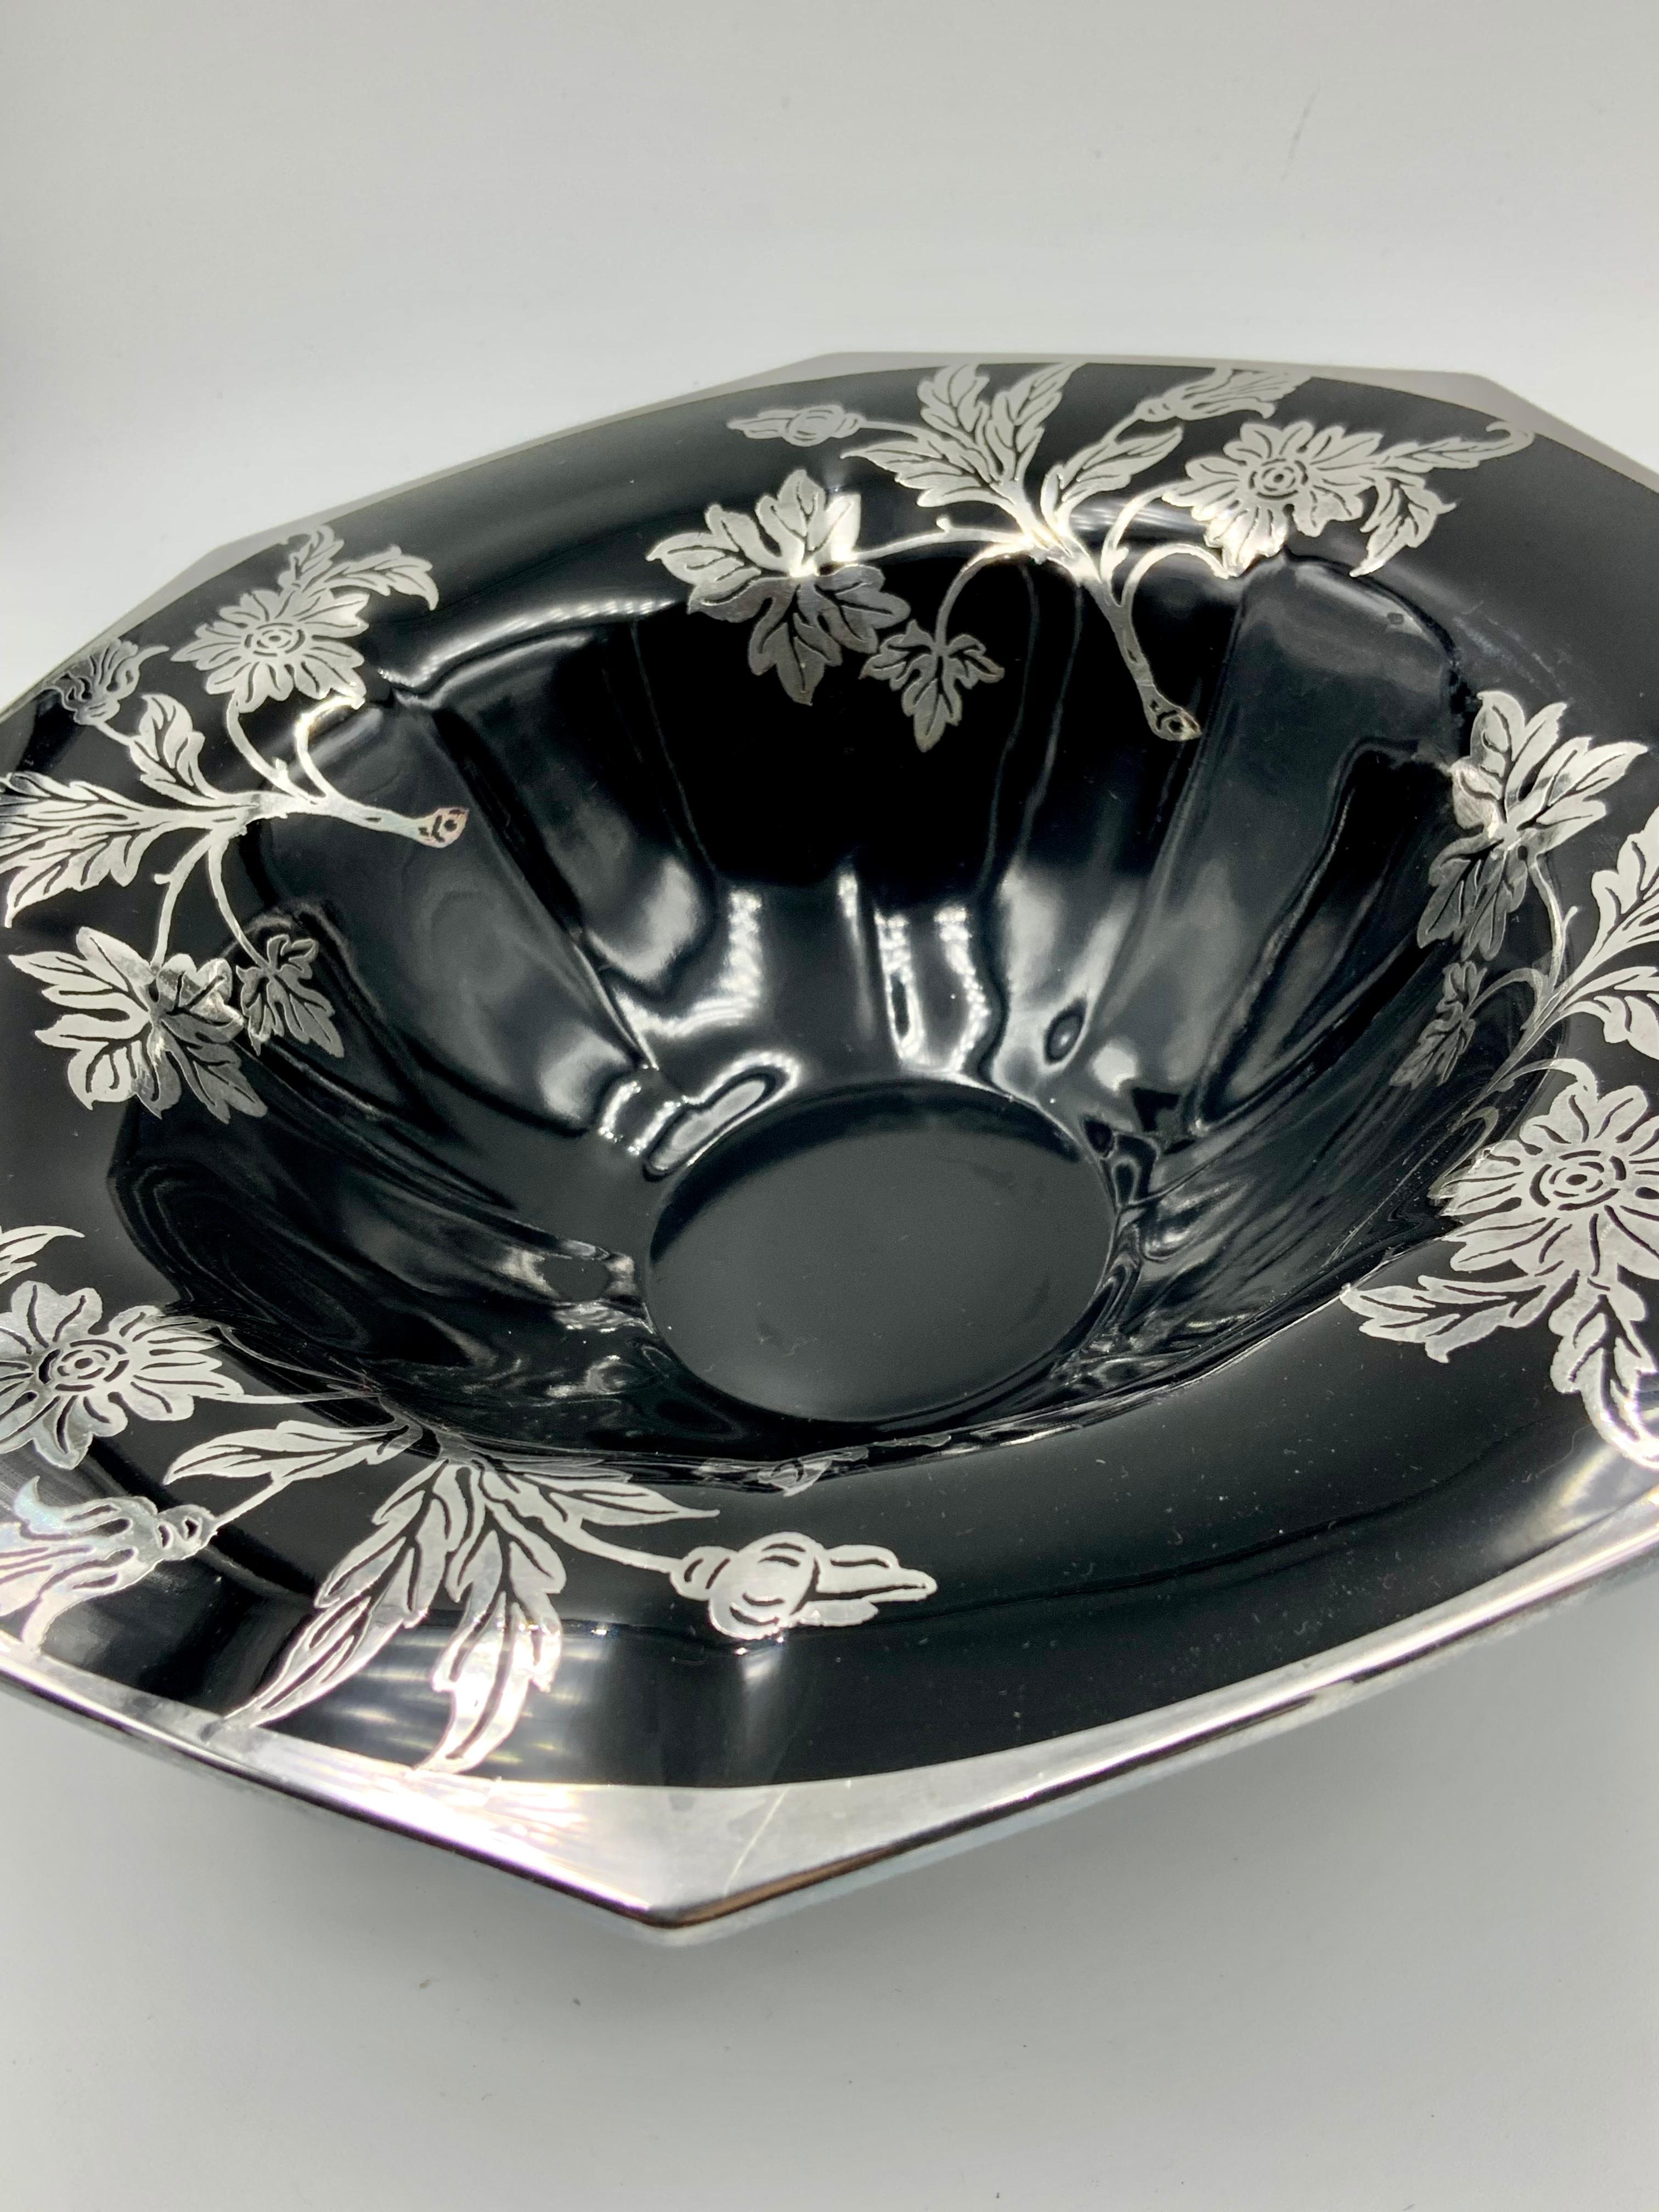 Beautiful octagonal black / amethyst glass bowl with flower and leaf sterling silver over lay design. The bottom has 4 feet.